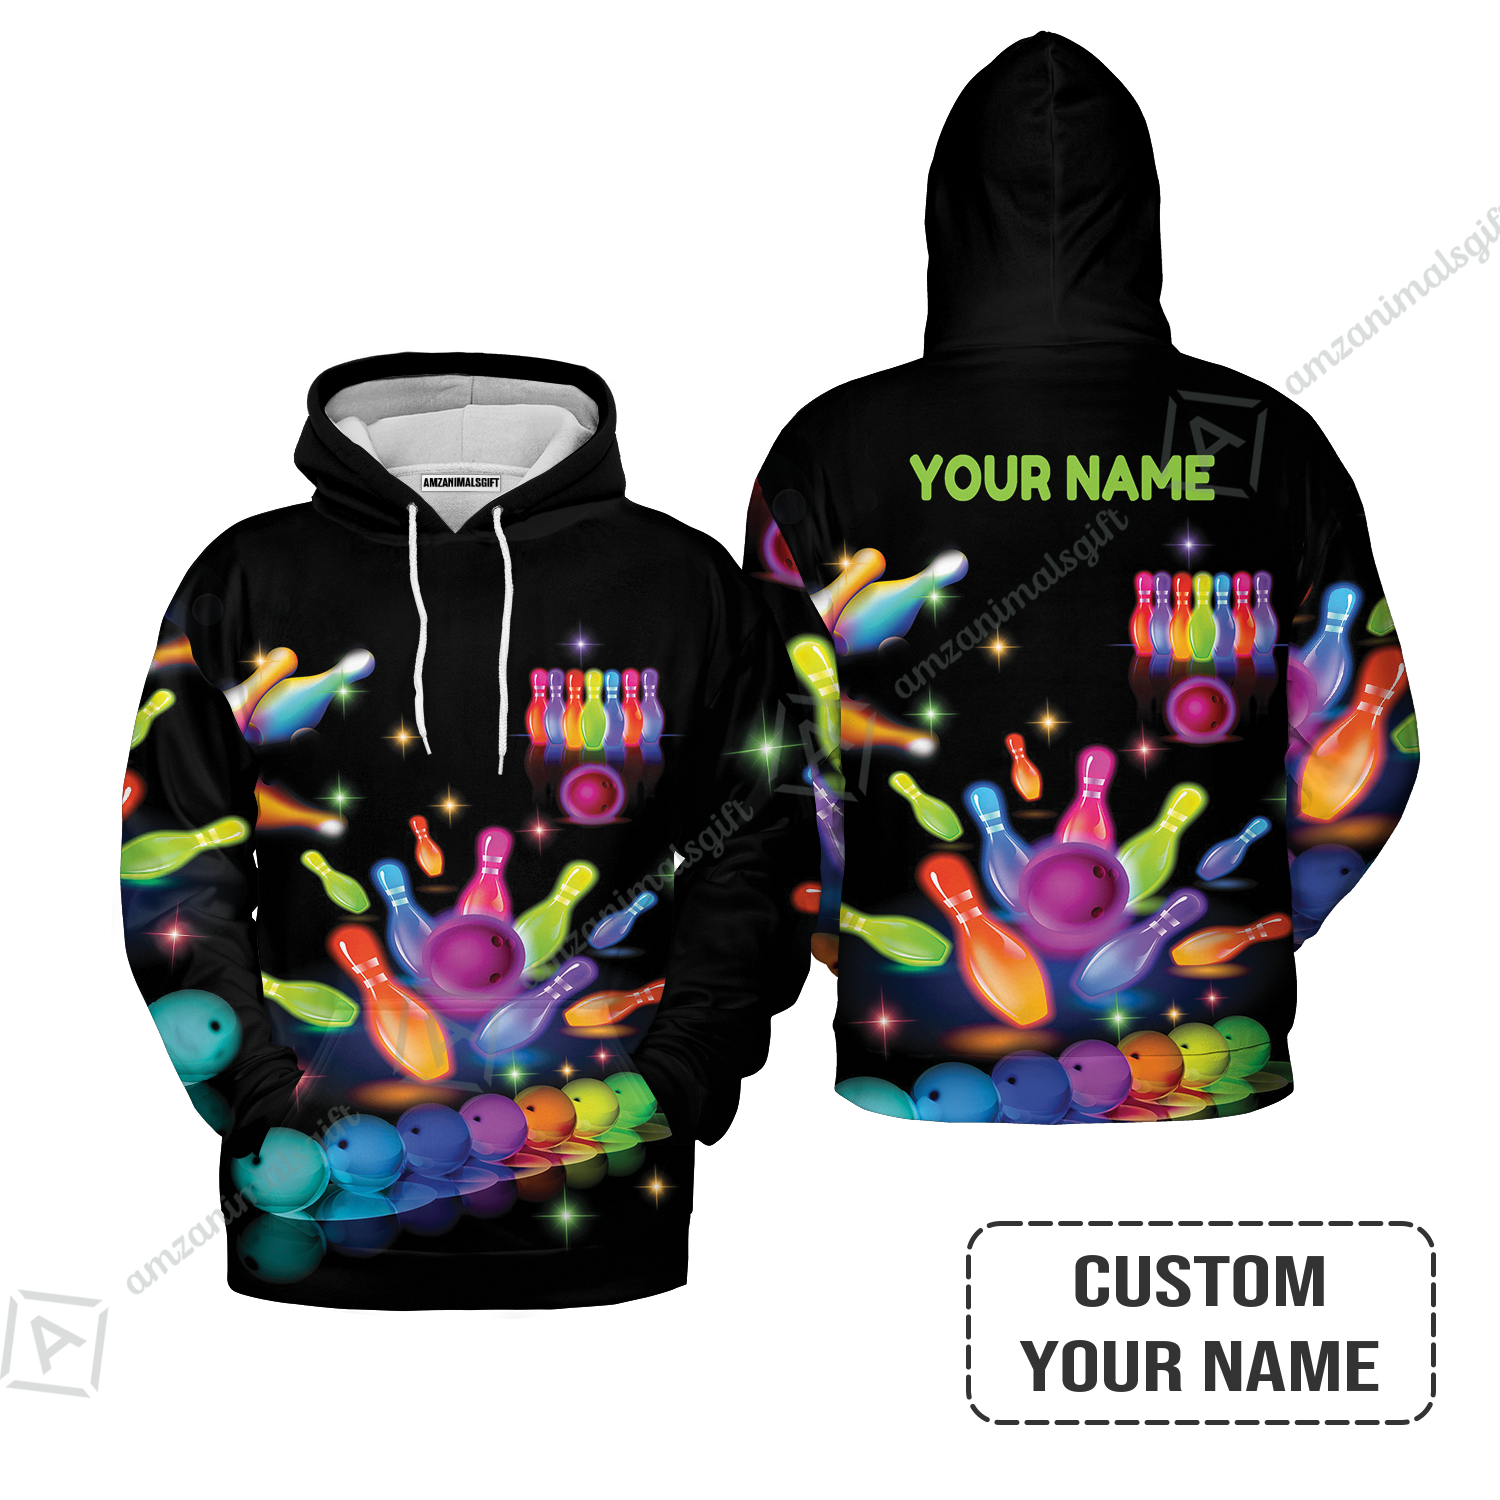 Bowling Hoodie With Customized Name, Colorful Bowling Pattern Hoodie For Men And Women, Perfect Outfits For Bowling Lovers, Bowlers